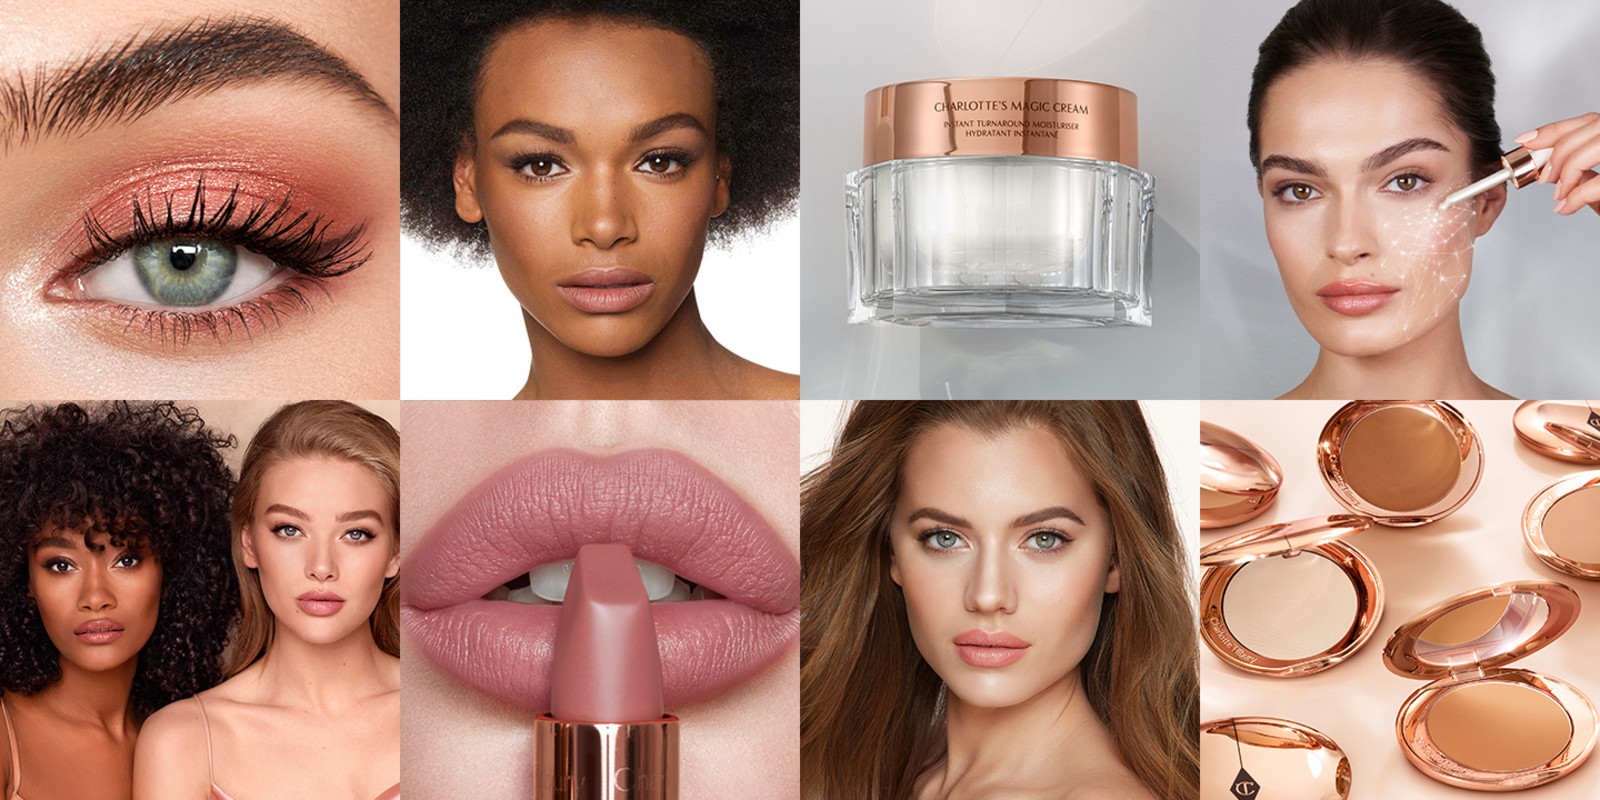 Banner with images of a single-eye close-up of a model wearing shimmery rose-gold eyeshadow, deep-tone model with glowy bronzed skin, pearly-white cream in glass jar with gold lid, light-tone model applying a luminous serum with a dropper, deep and fair-tone models wearing glowy makeup, close-up of fair-tone model wearing nude pink lipstick, and open bronzer compacts. 